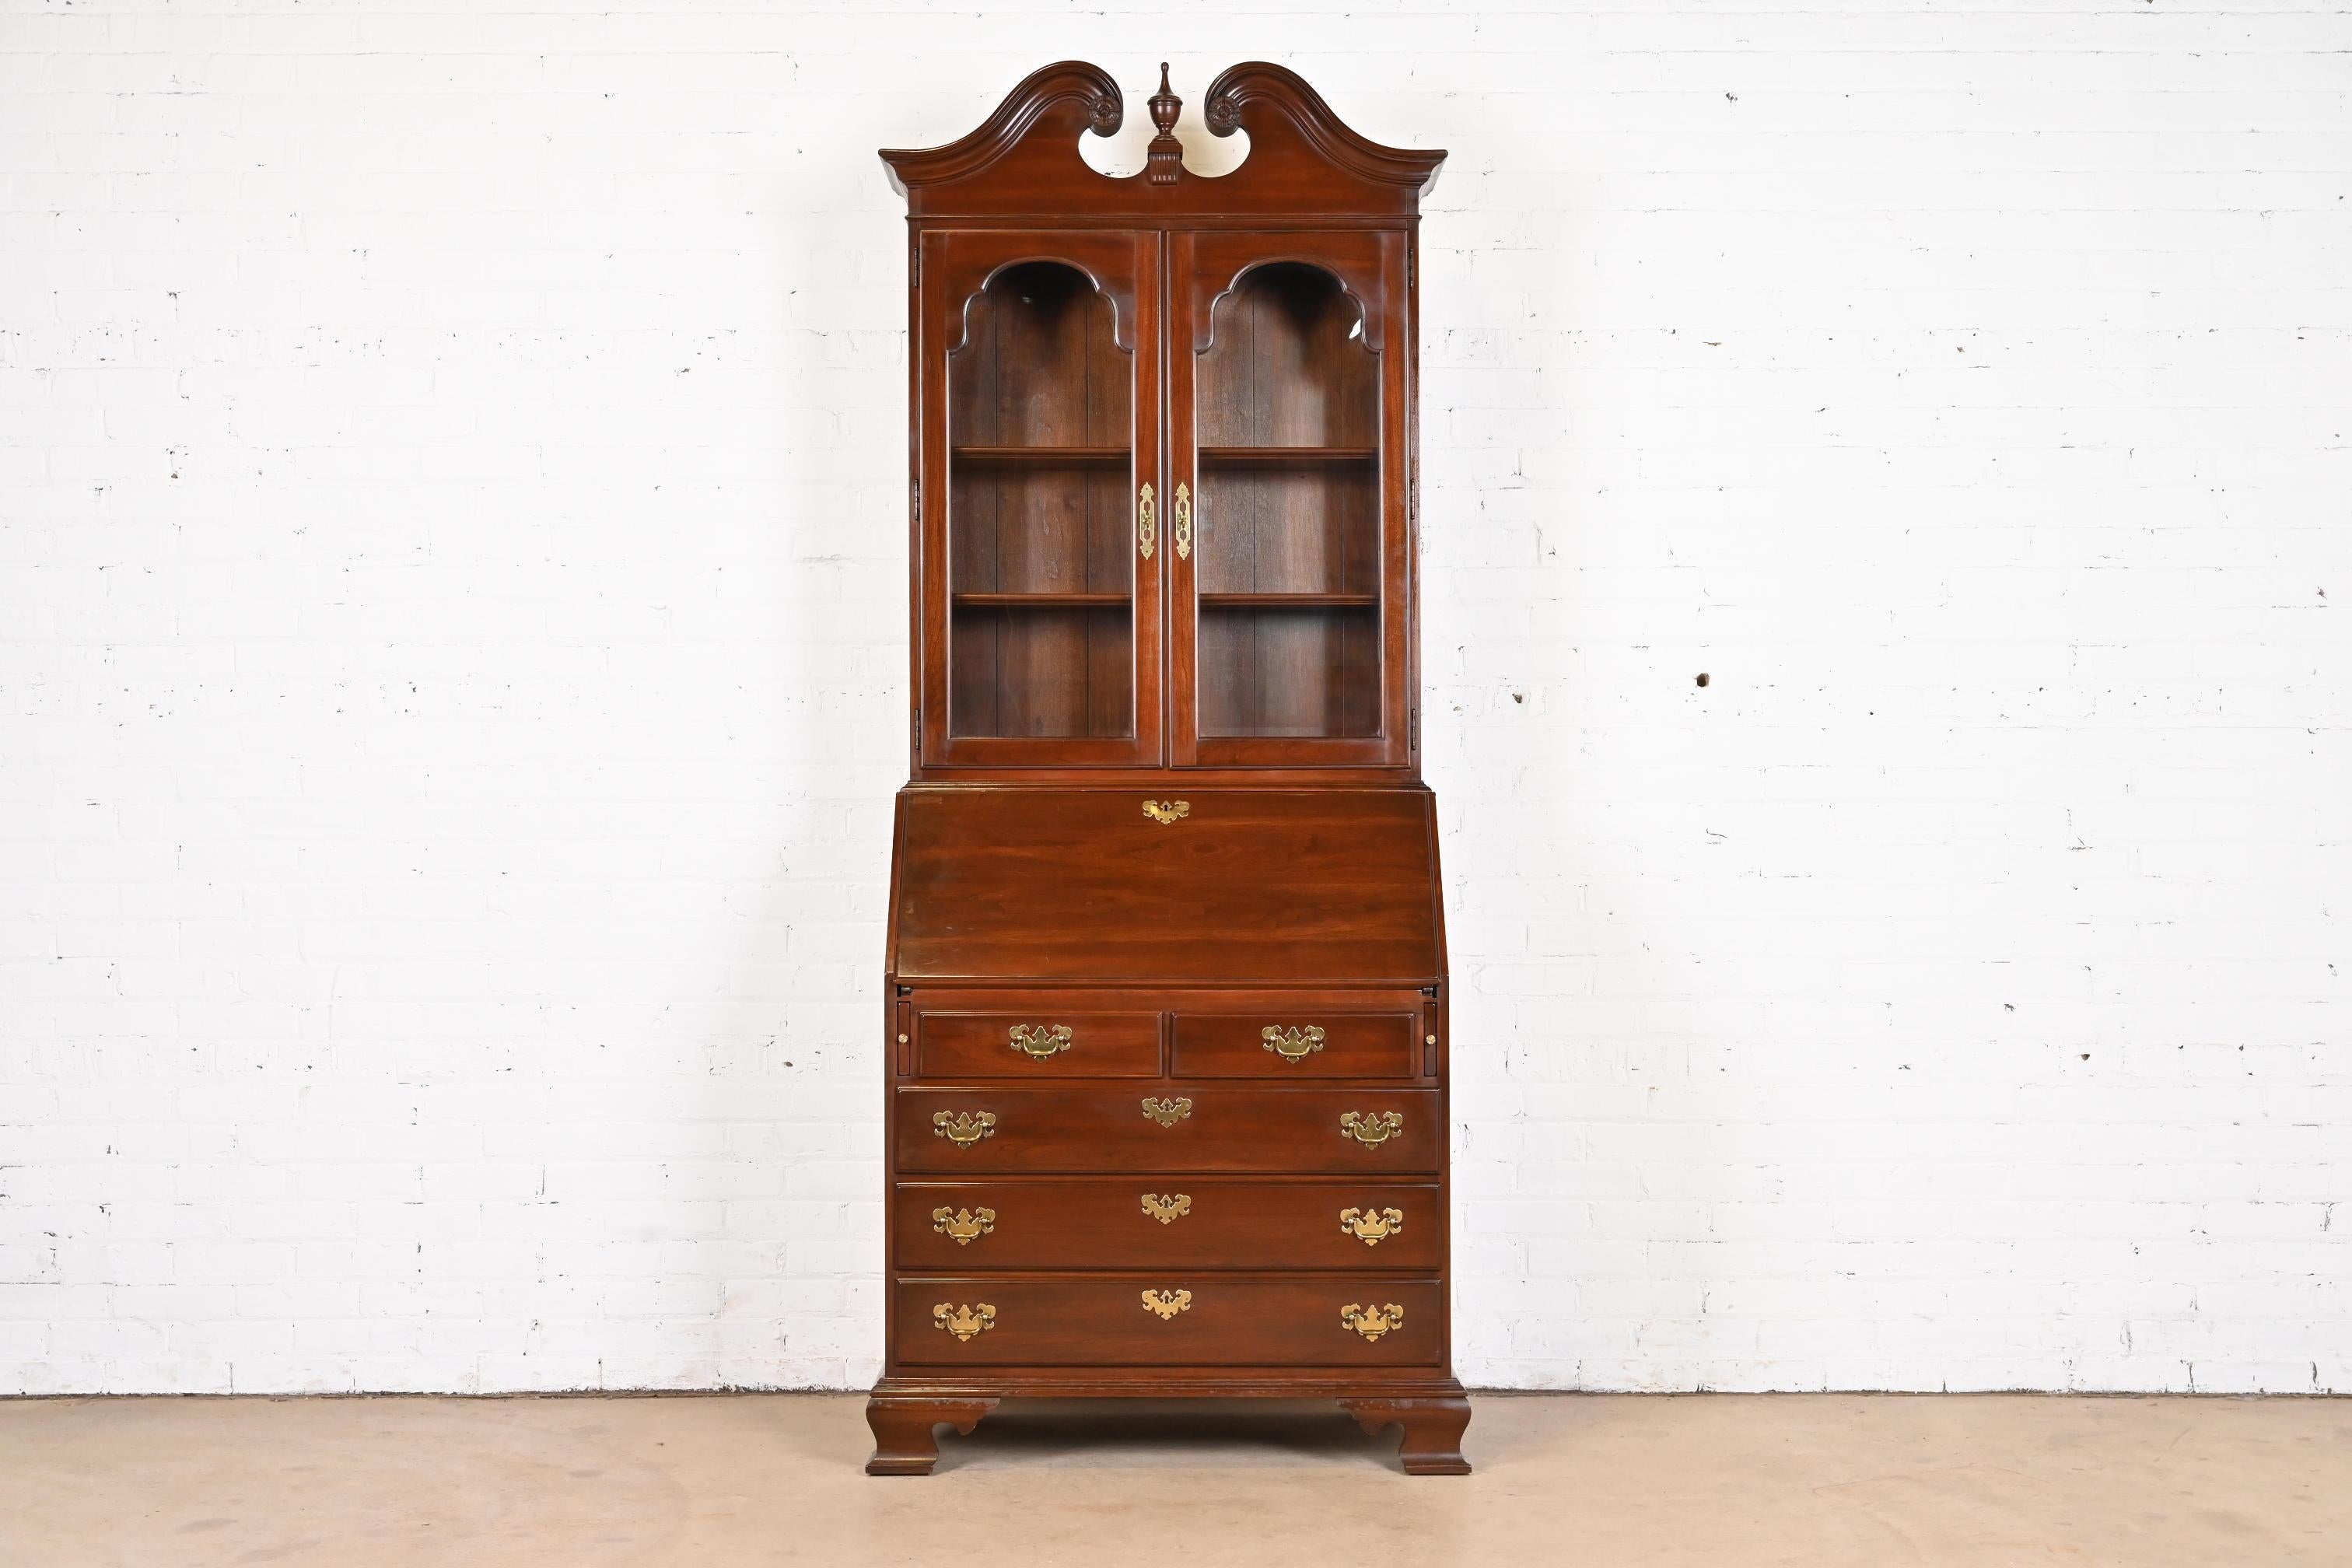 A beautiful Georgian or Chippendale style bureau with drop front secretary desk and bookcase hutch top

USA, Late 20th Century

Gorgeous carved solid cherry wood, with original brass hardware and glass front doors.

Measures: 36.25